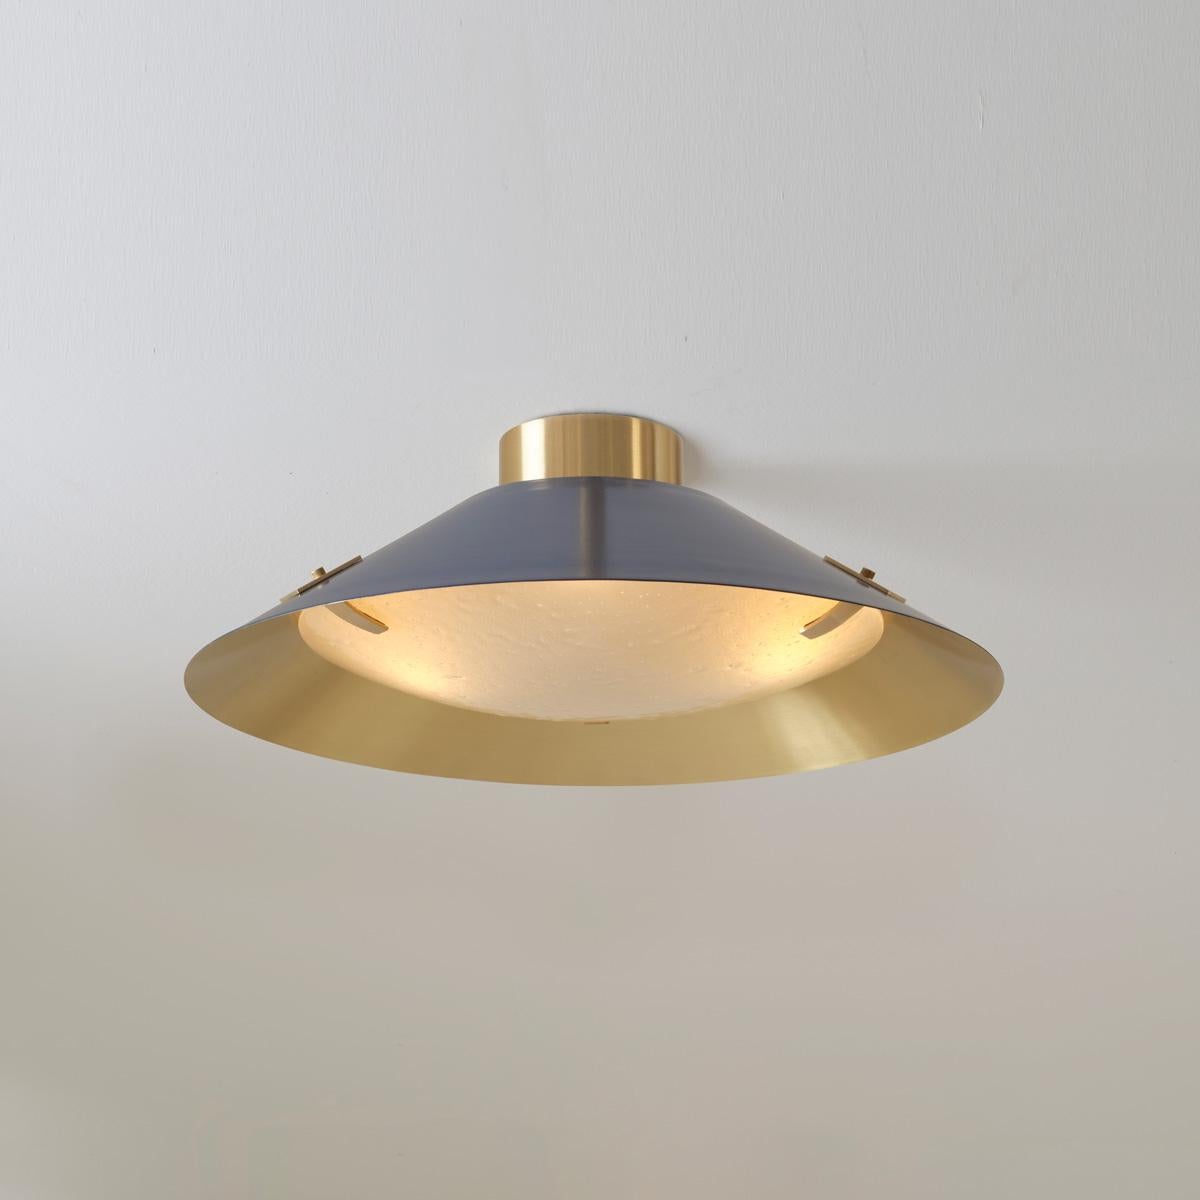 Kono Pendant by Gaspare Asaro. Satin Brass and Stone Grey For Sale 1